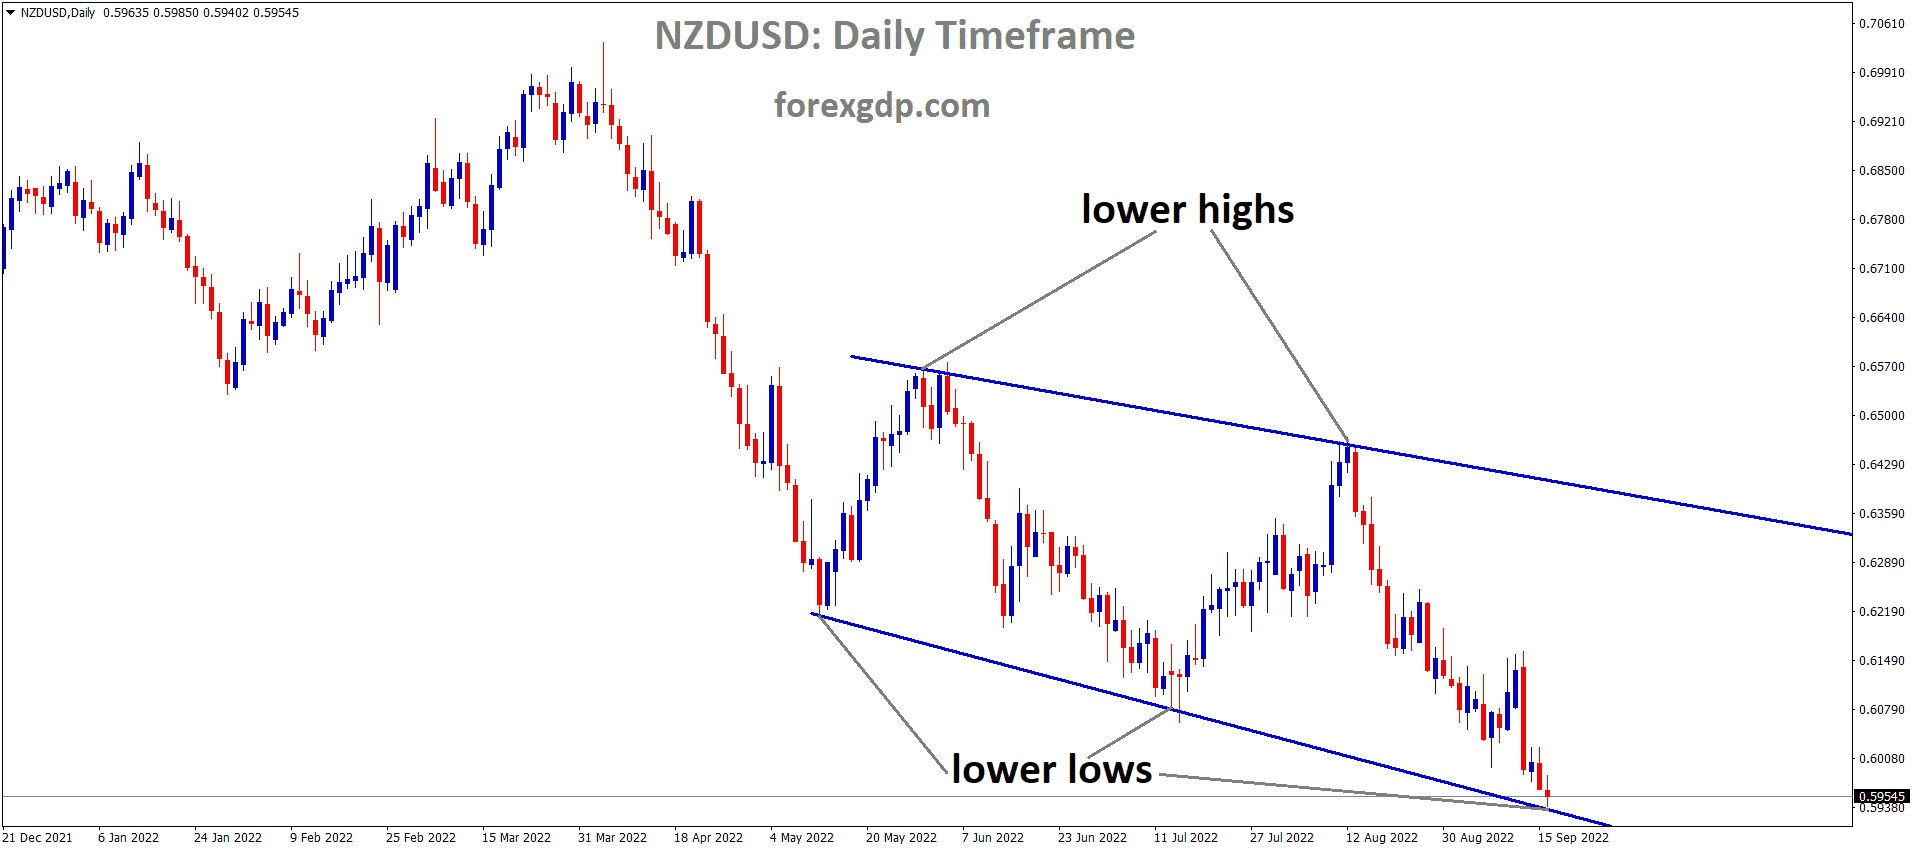 NZDUSD is moving in the Descending channel and the market has reached the lower low area of the channel 1